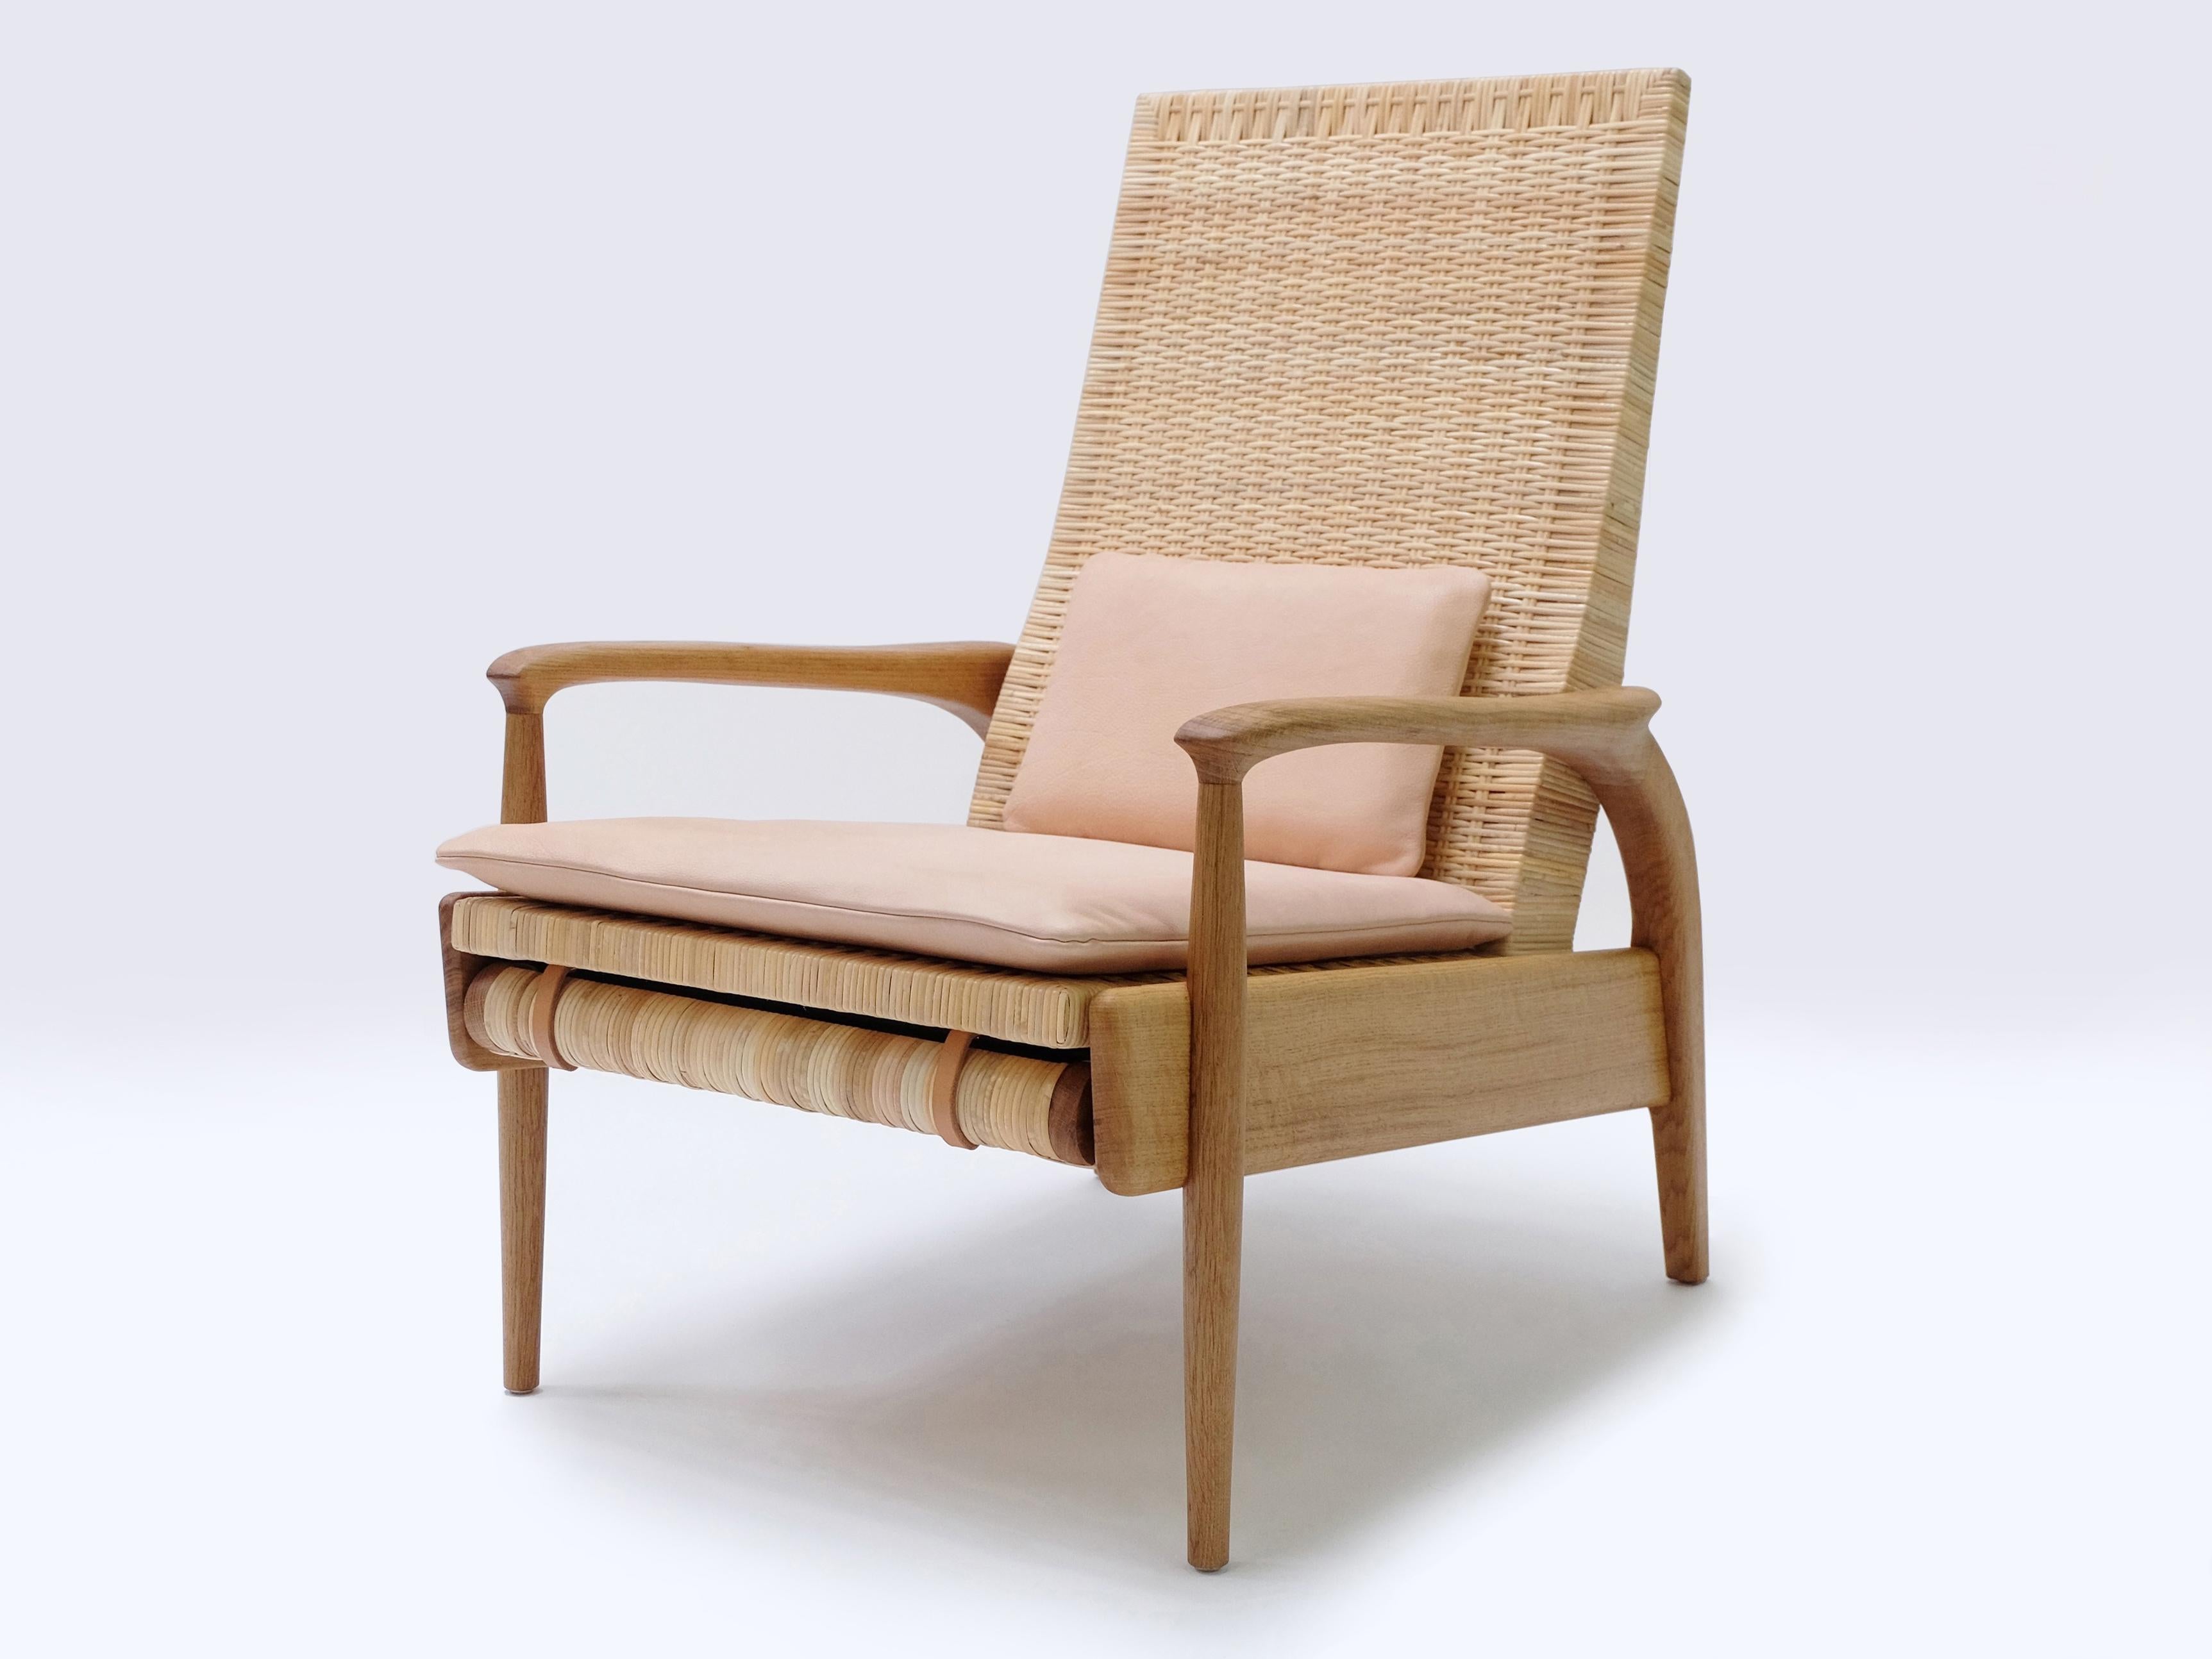 Contemporary Pair of Reclining Armchairs, Solid Oak, Handwoven Natural Cane, Leather Cushions For Sale